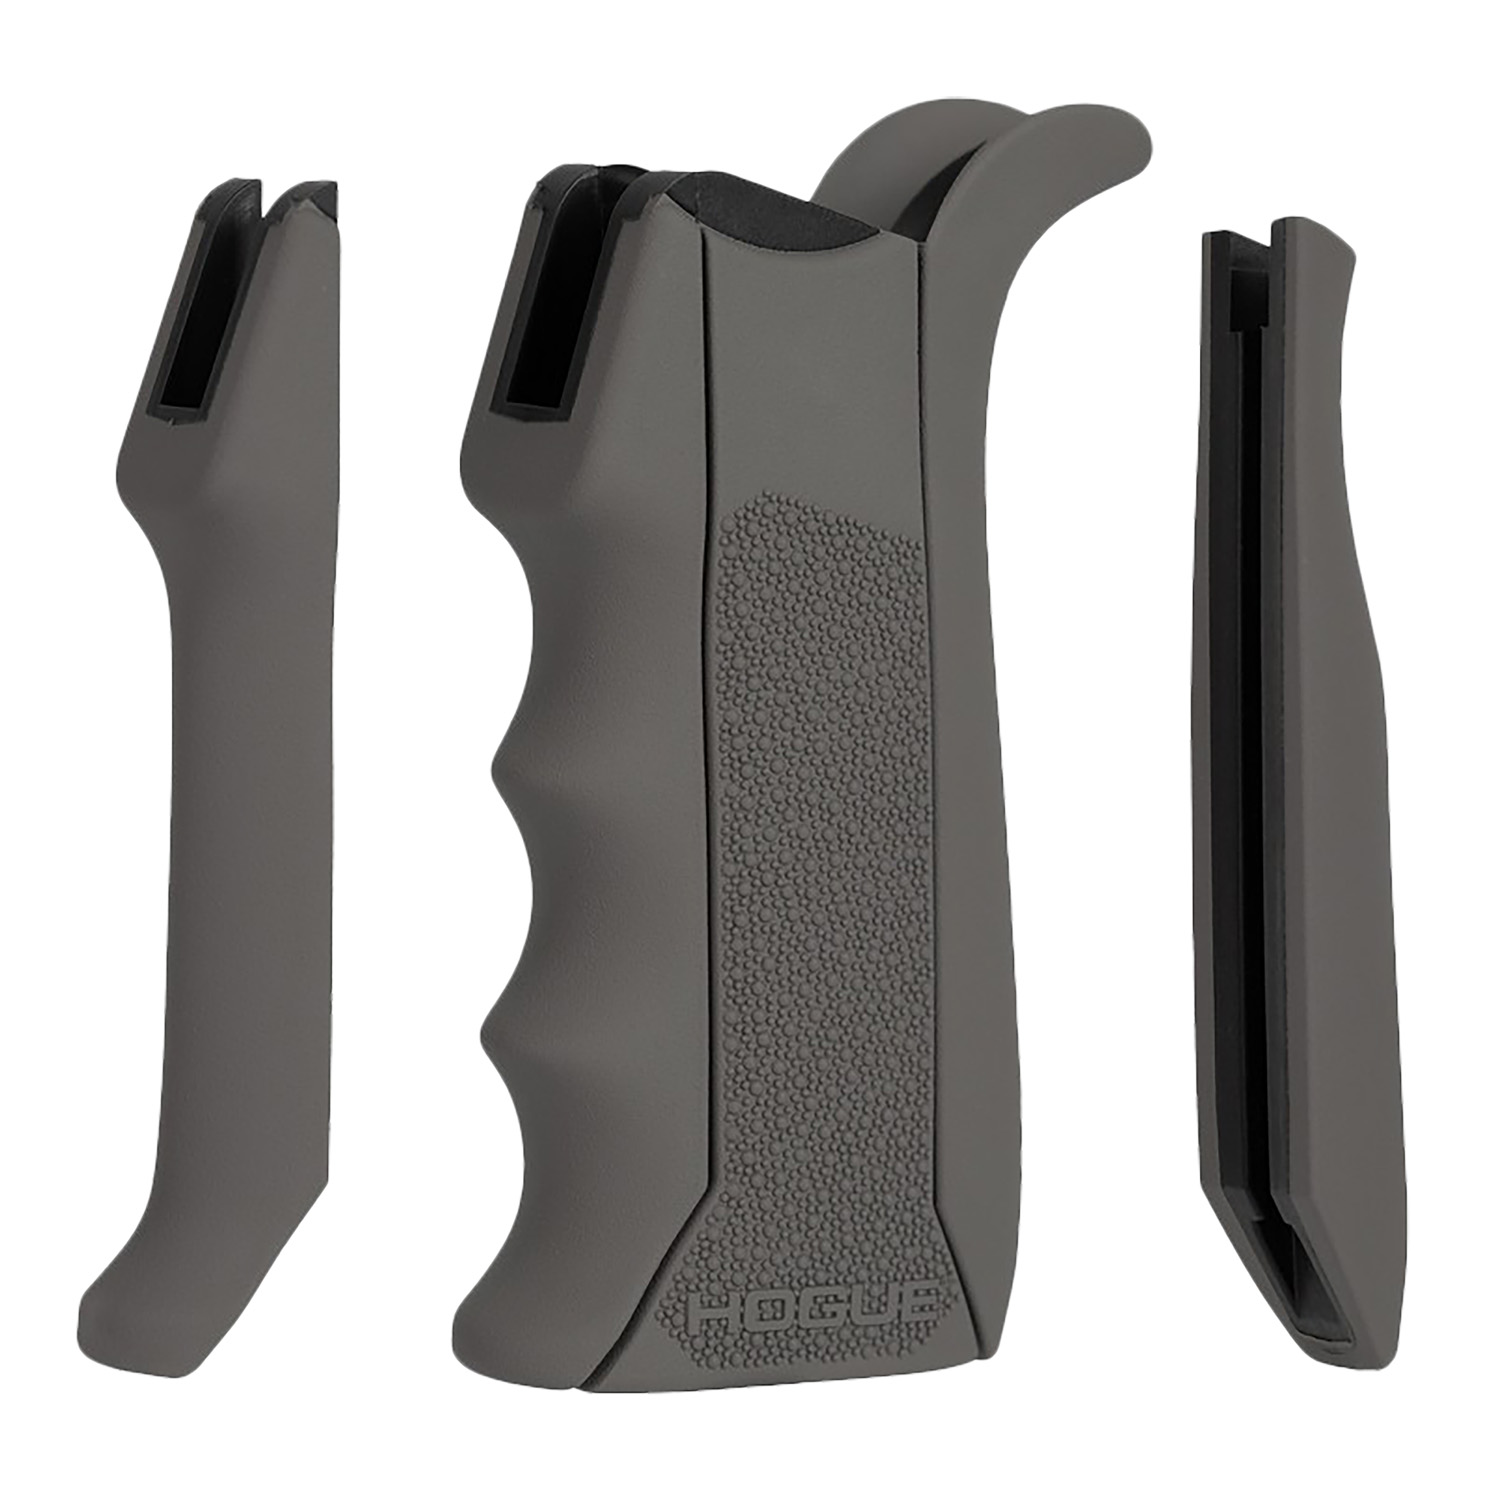 Hogue 13042 Modular Overmolded Gray Rubber Pistol Grip With Finger Grooves Fits AR-15/M16